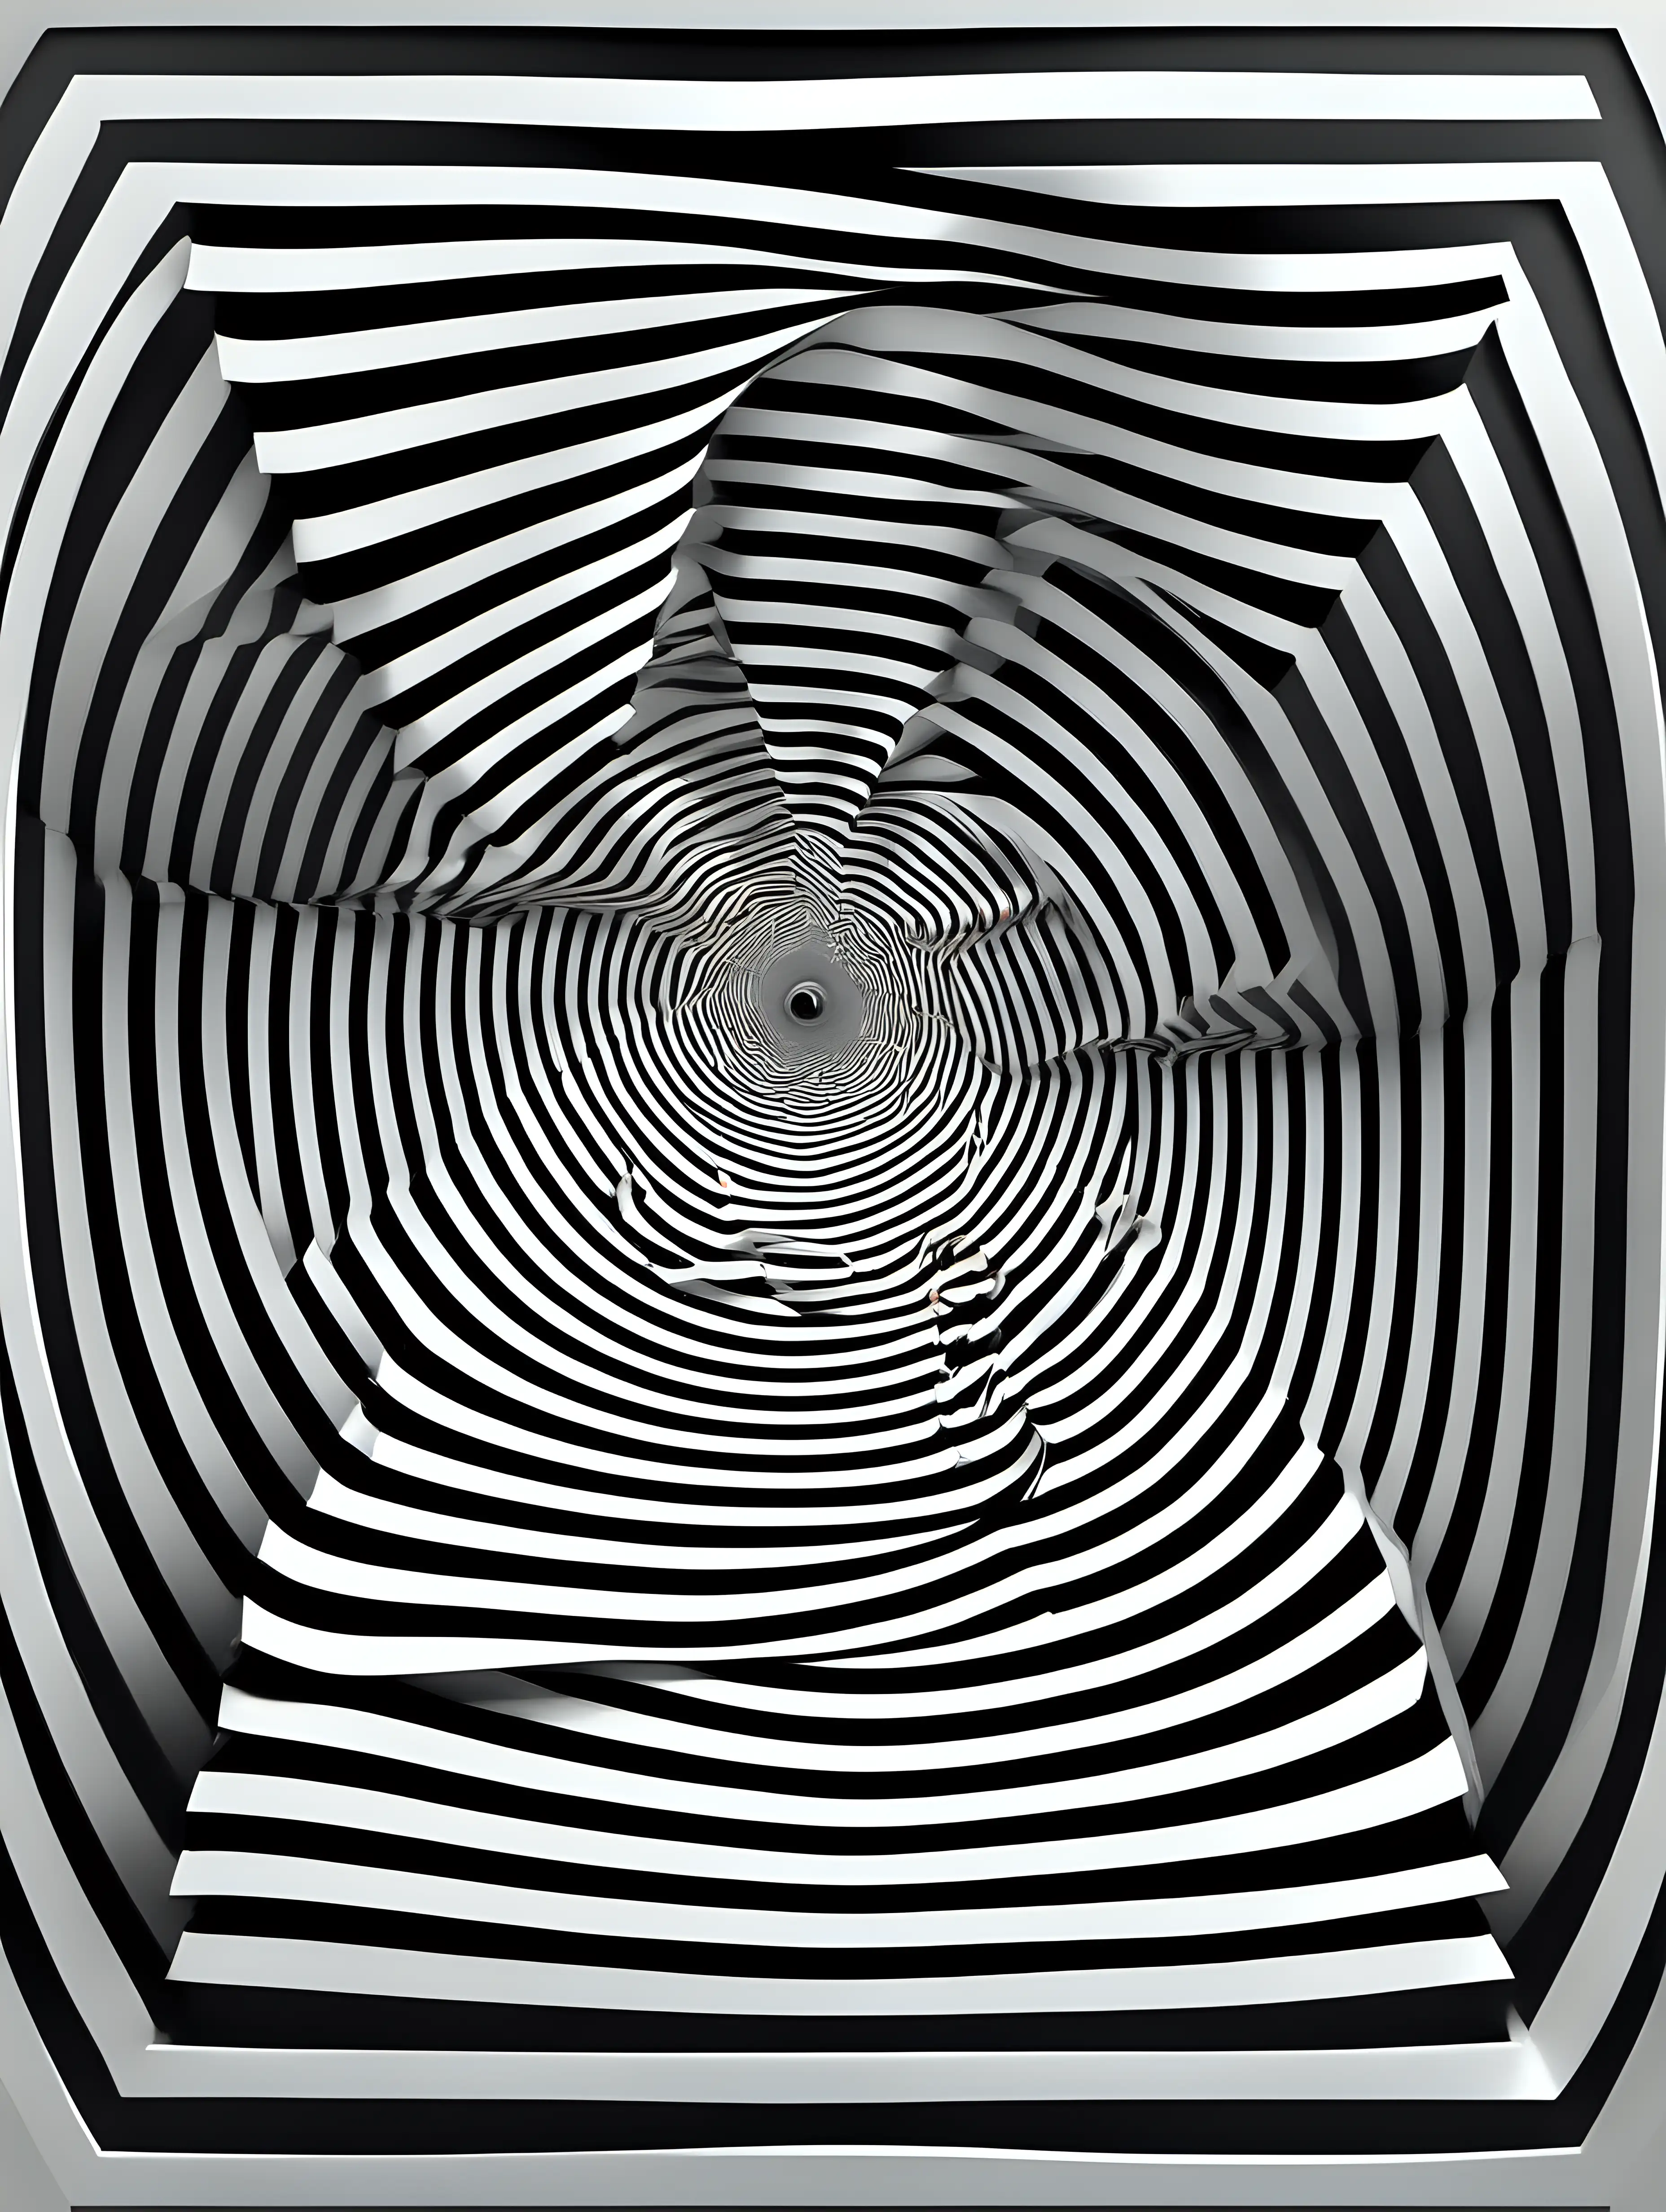 create a illustration page of a 3d hypnotic illusion
